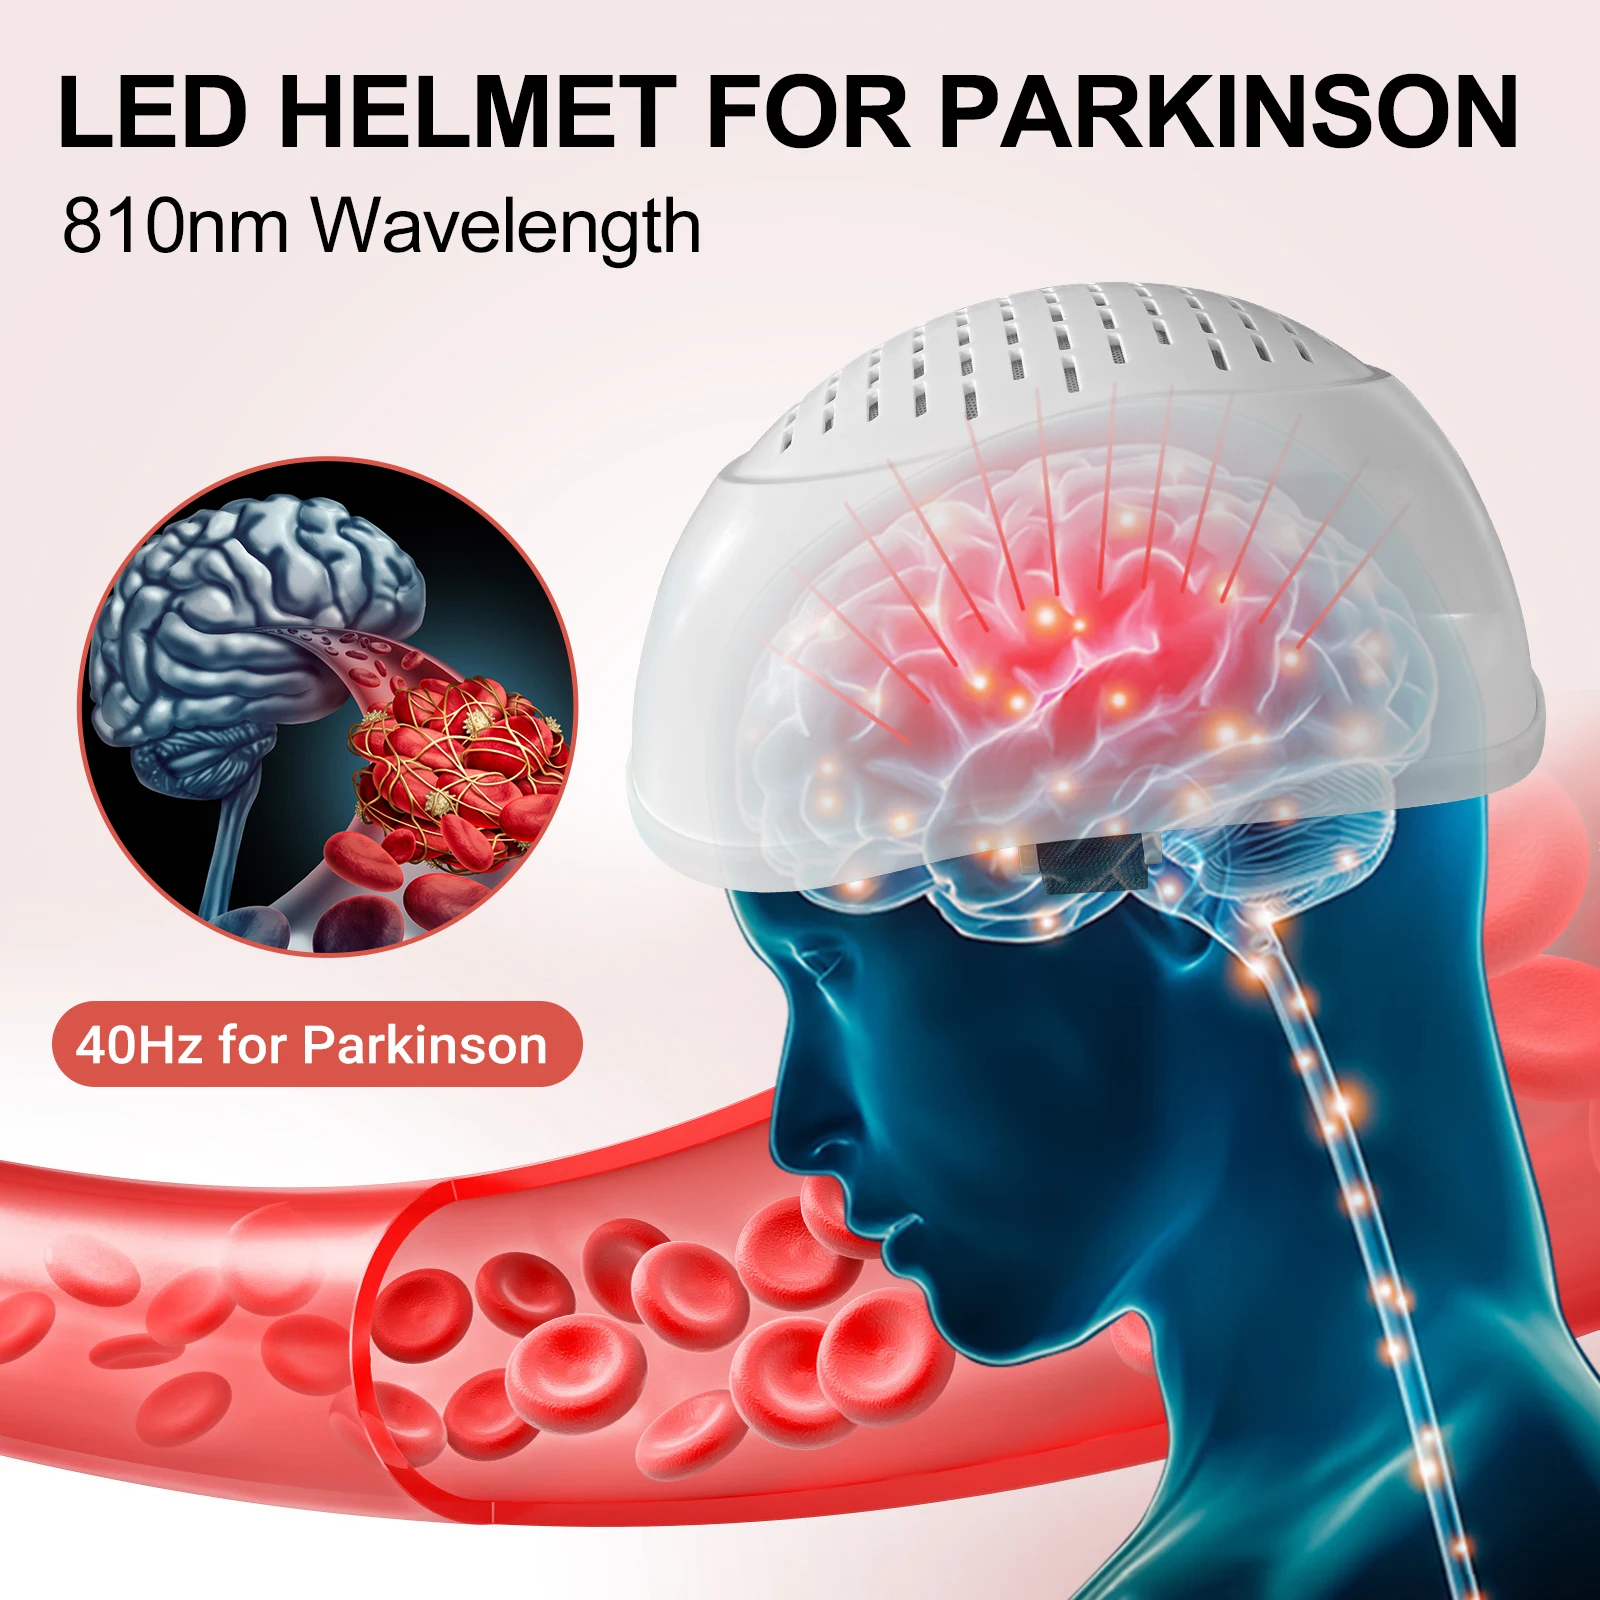 ZJZK 810nm Infrared LED Helmet Brain Photobiomodulation Light Therapy Device for Parkinson Stroke Depression Autism Treatment 810nm near infrared led helmet brain photobiomodulation light therapy device for parkinson stroke depression autism treatment